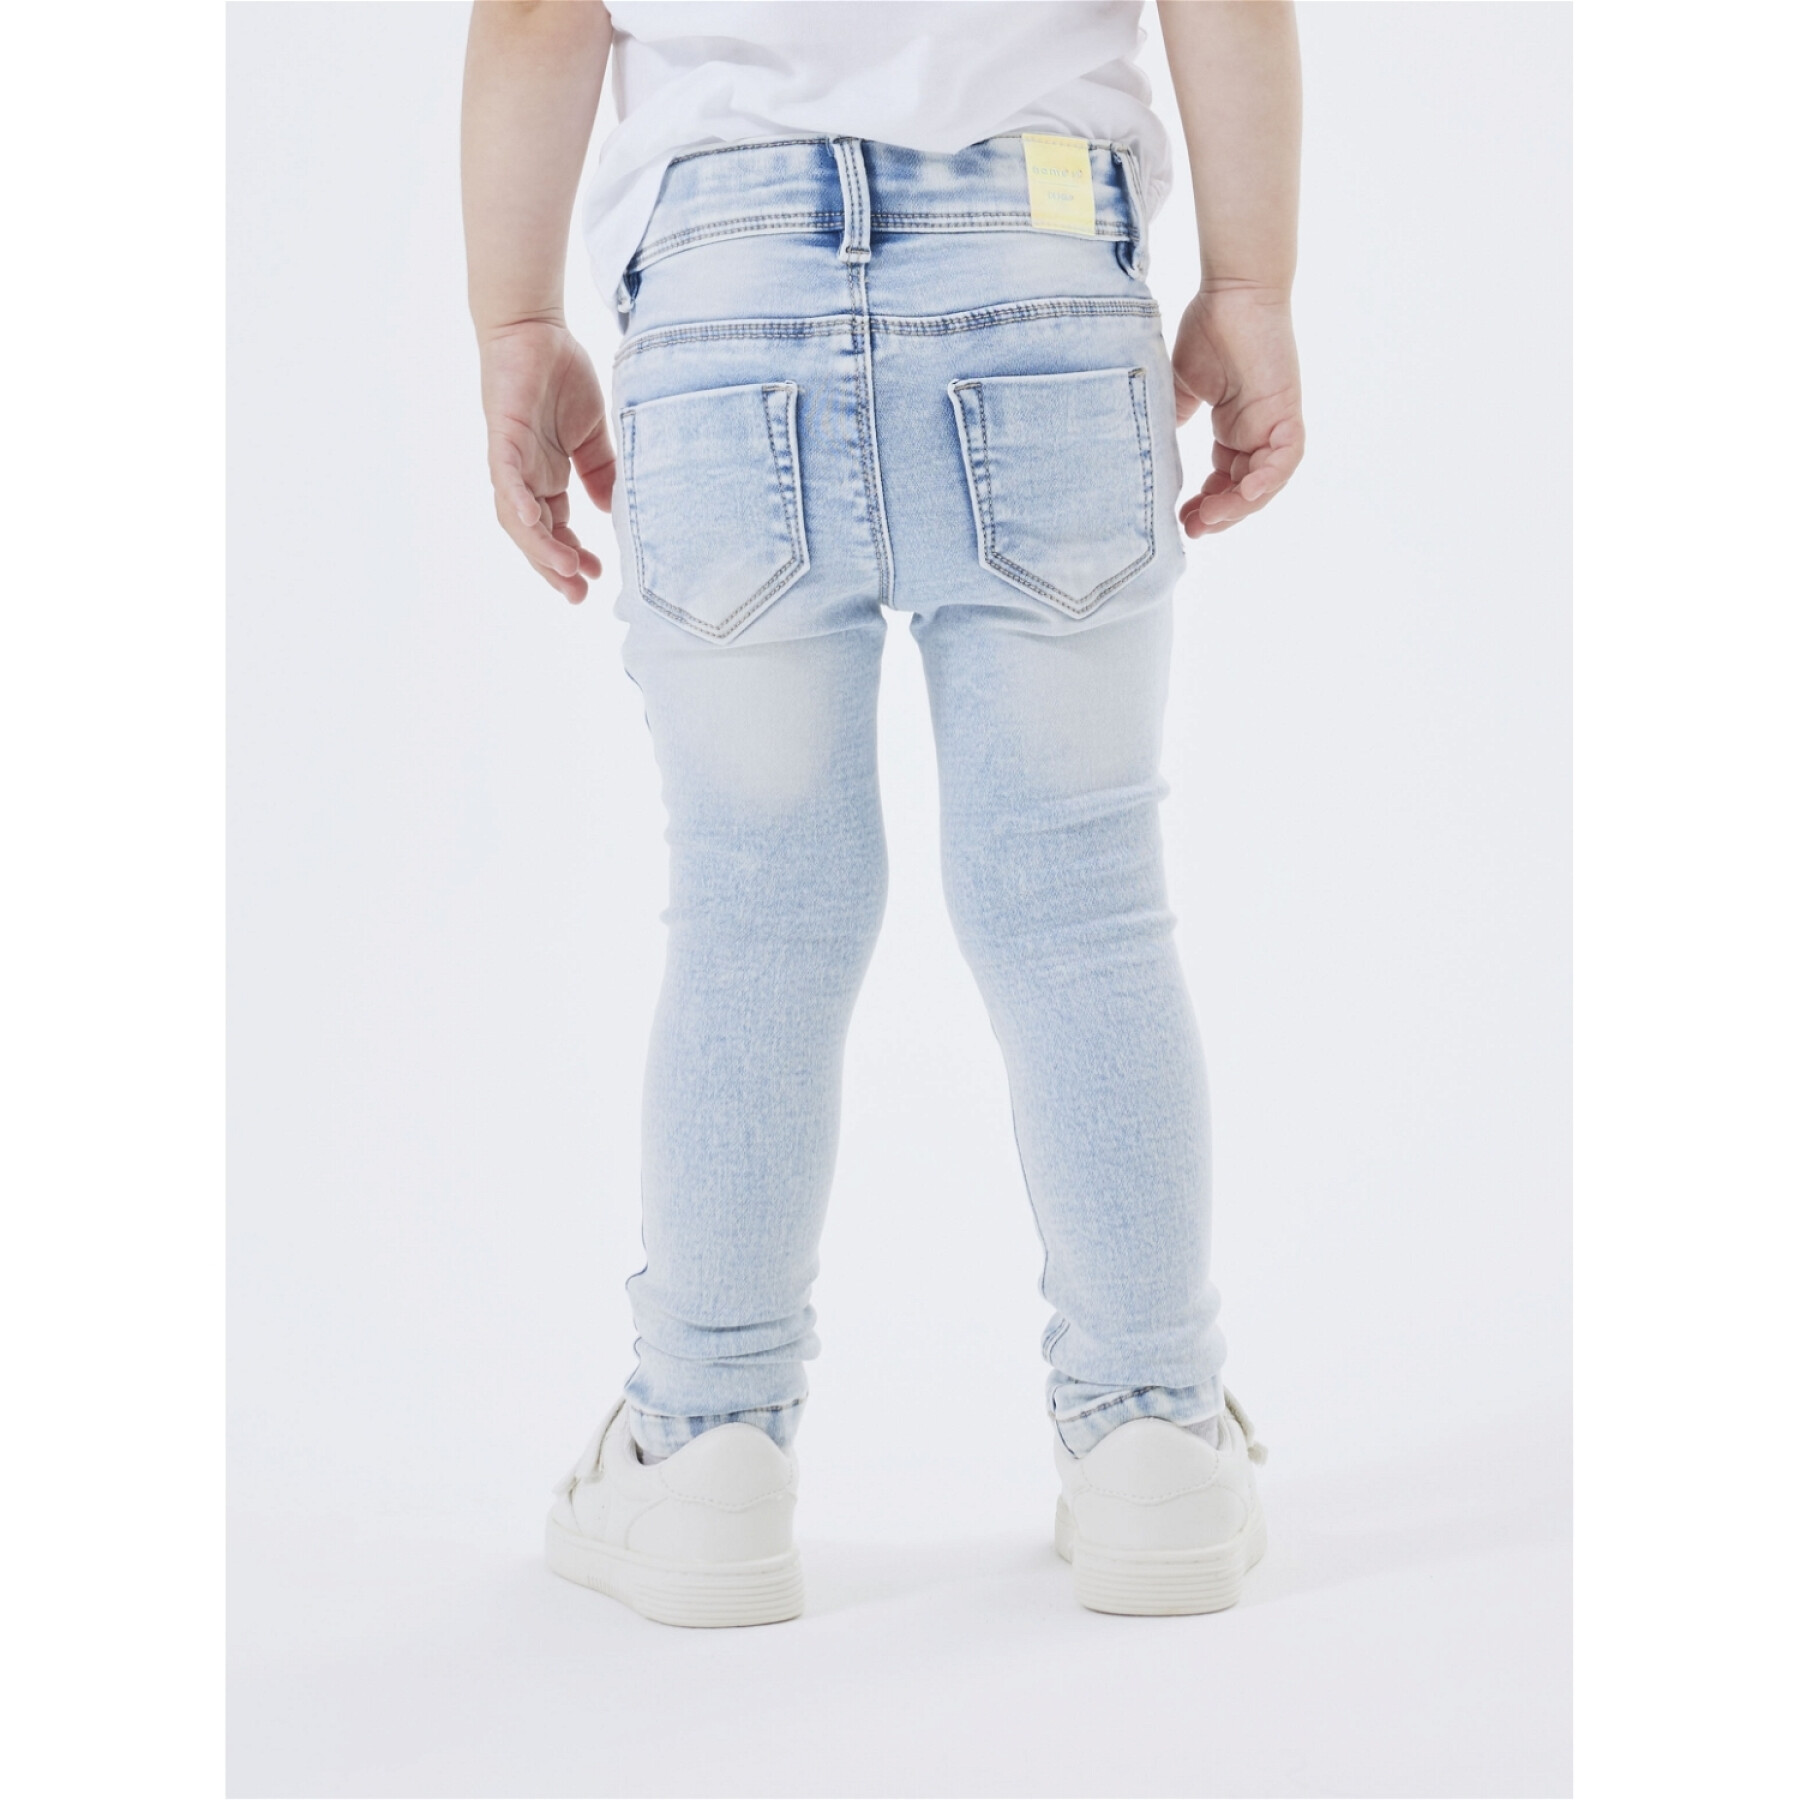 Jeans skinny bébé fille Name it Polly 1842-TH